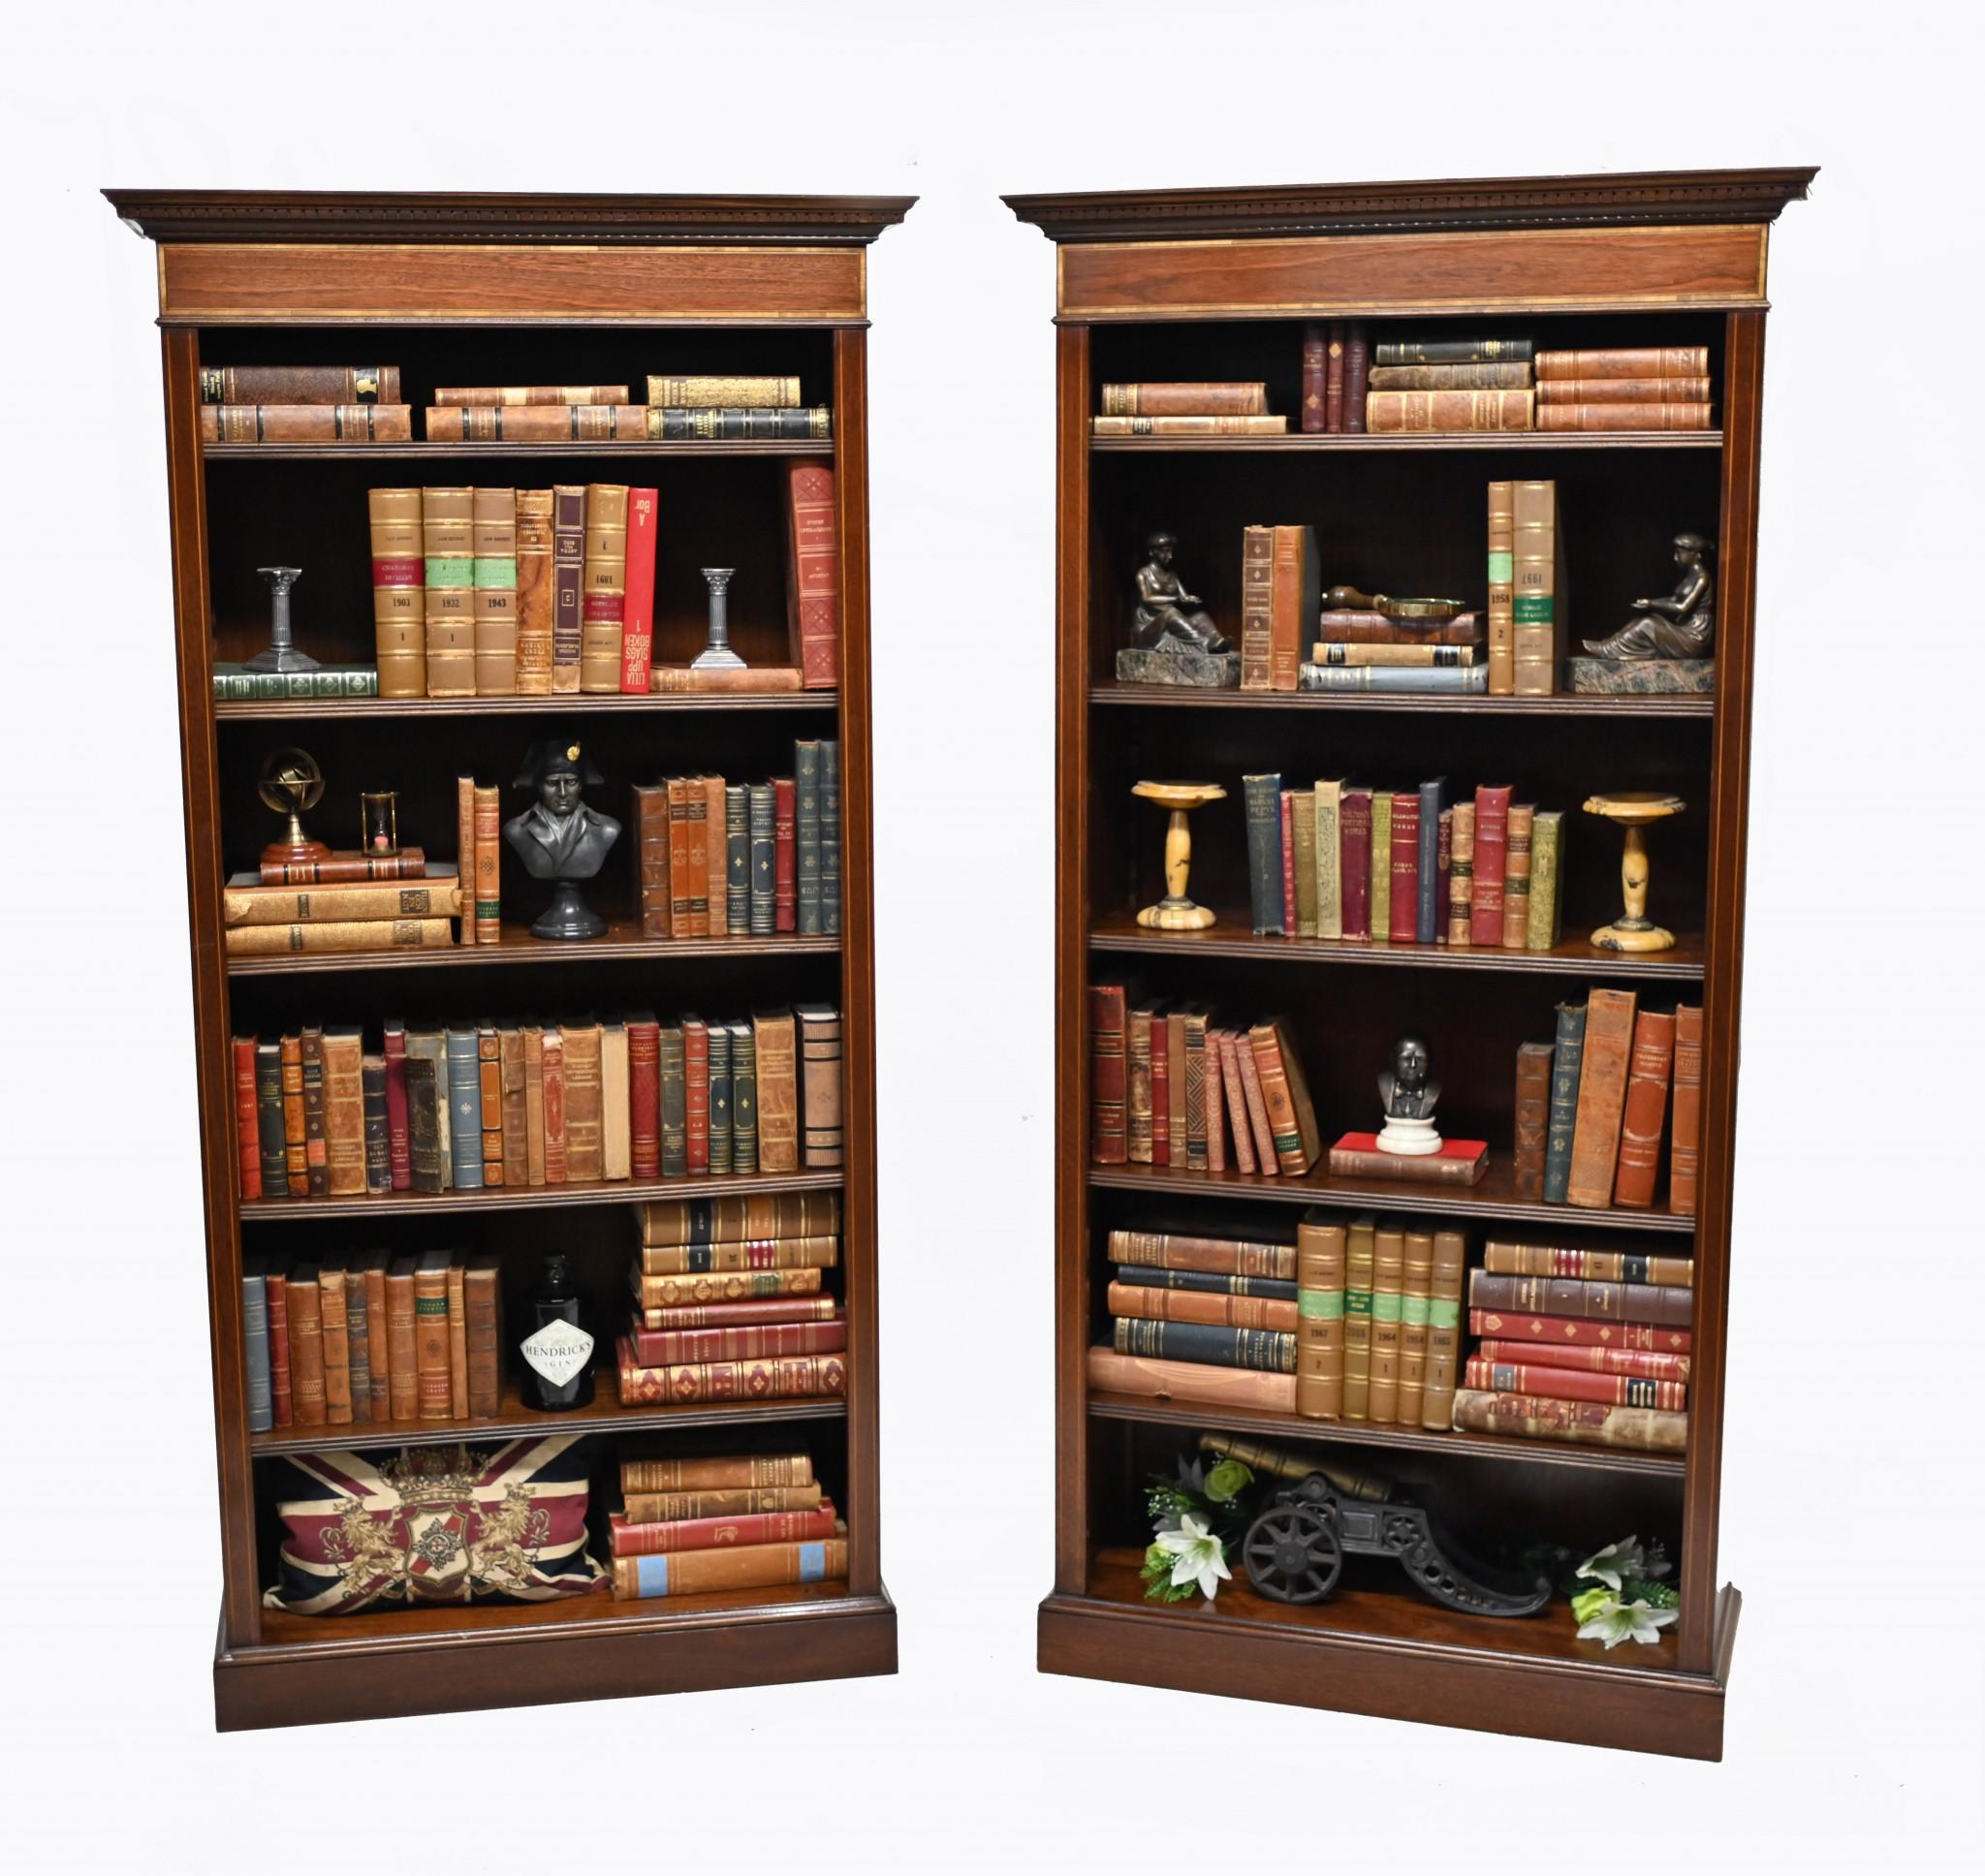 Gorgeous pair of English Edwardian style open bookcases
These are the perfect mix of form and function
Stand in at six feet tall so ample storage space
Work on the adjustable slat system with the shelves so great for both books and decorative